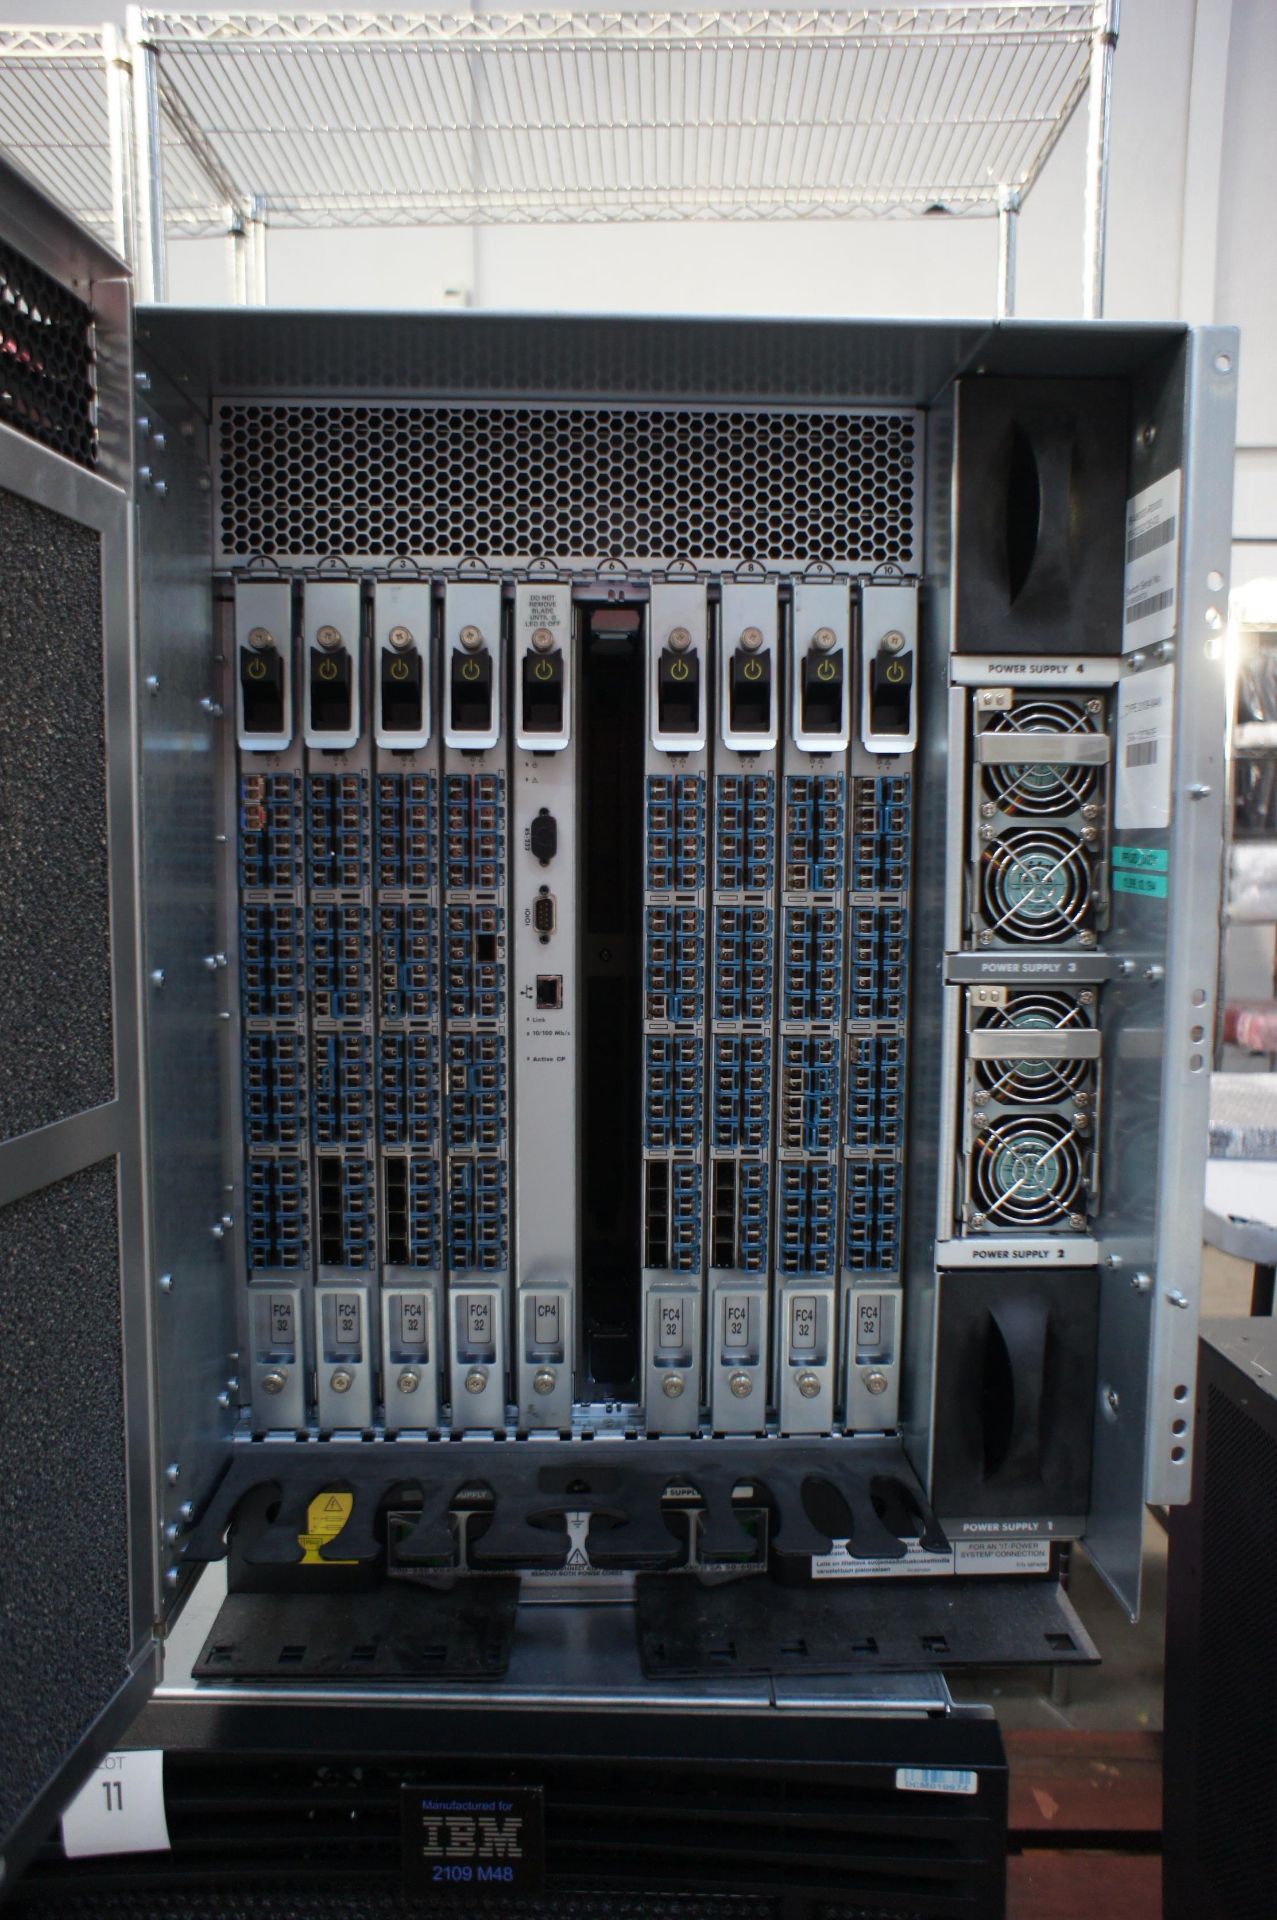 IBM2109-M48 SAN256 director cabinet with 8x FC4/32 cards and 1x CP4 cards